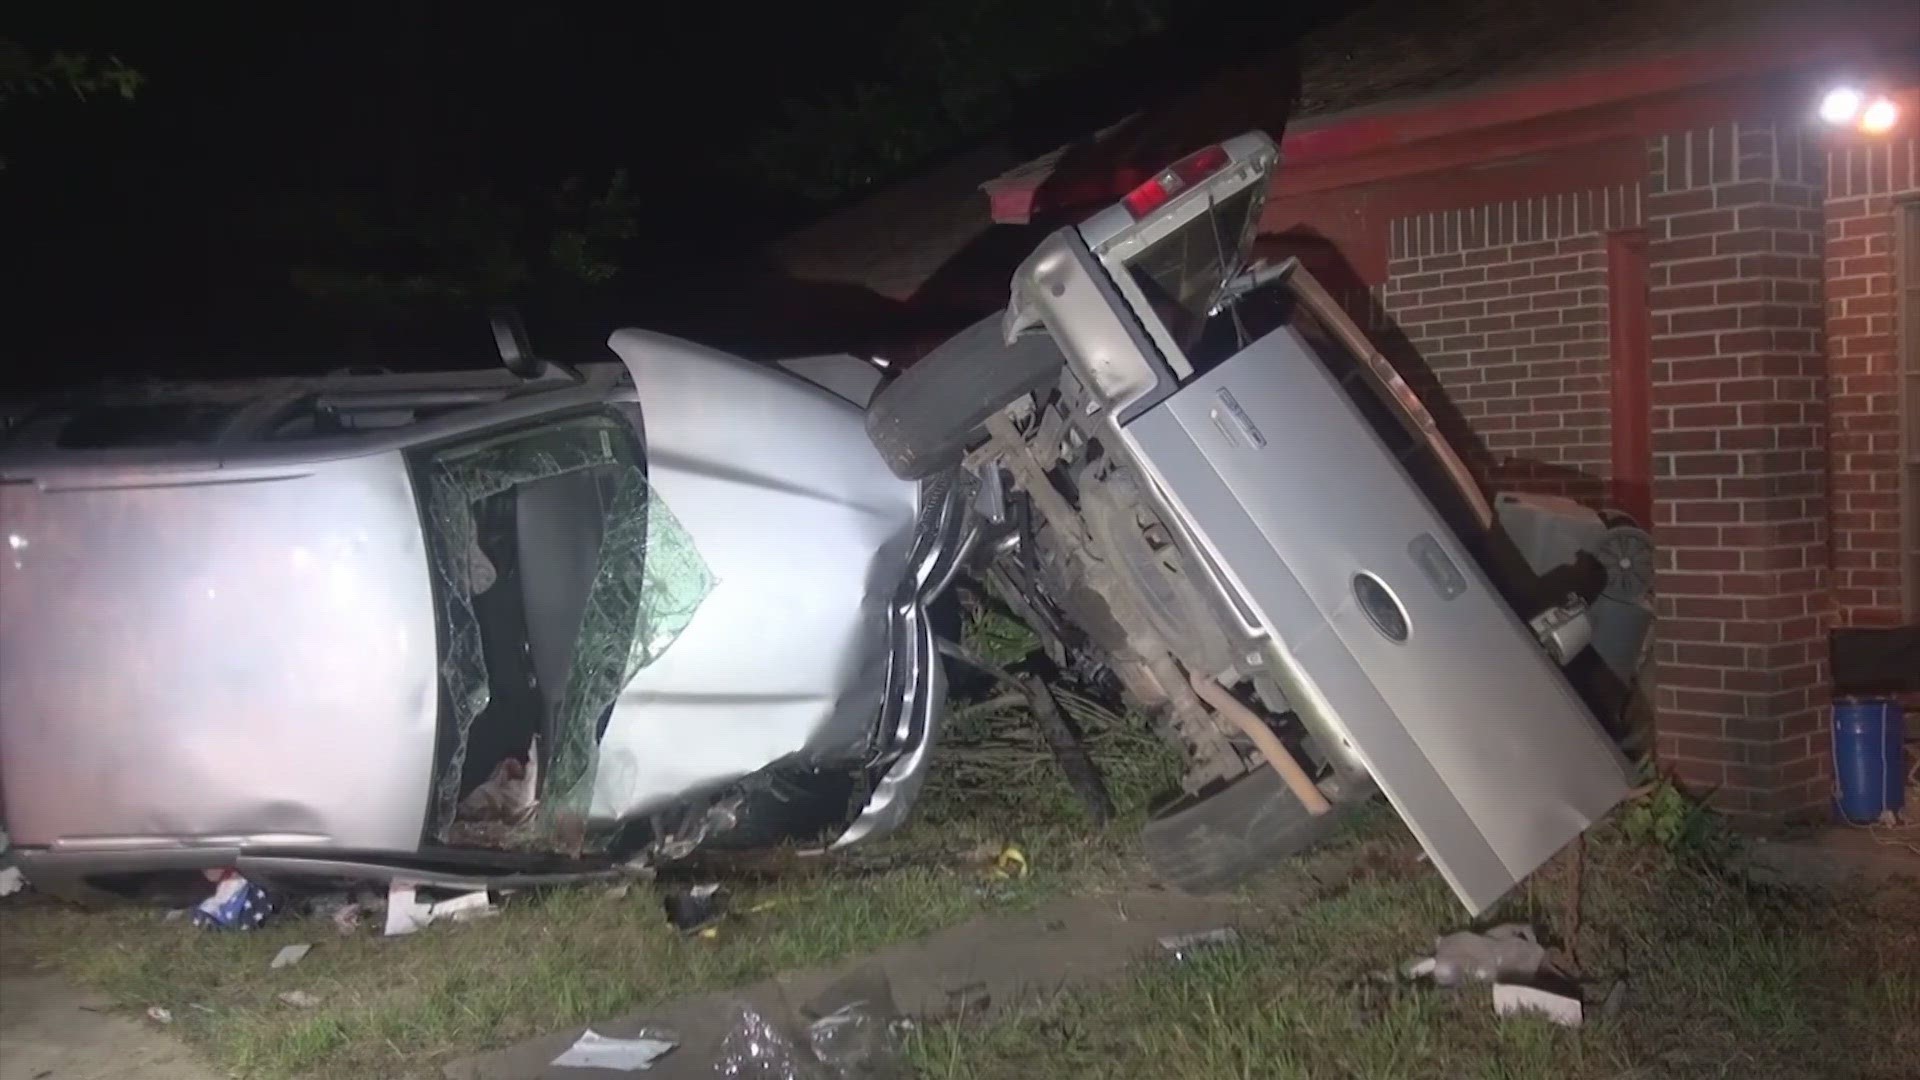 Officials said the truck T-boned another truck parked in the driveway, sending it into the home.